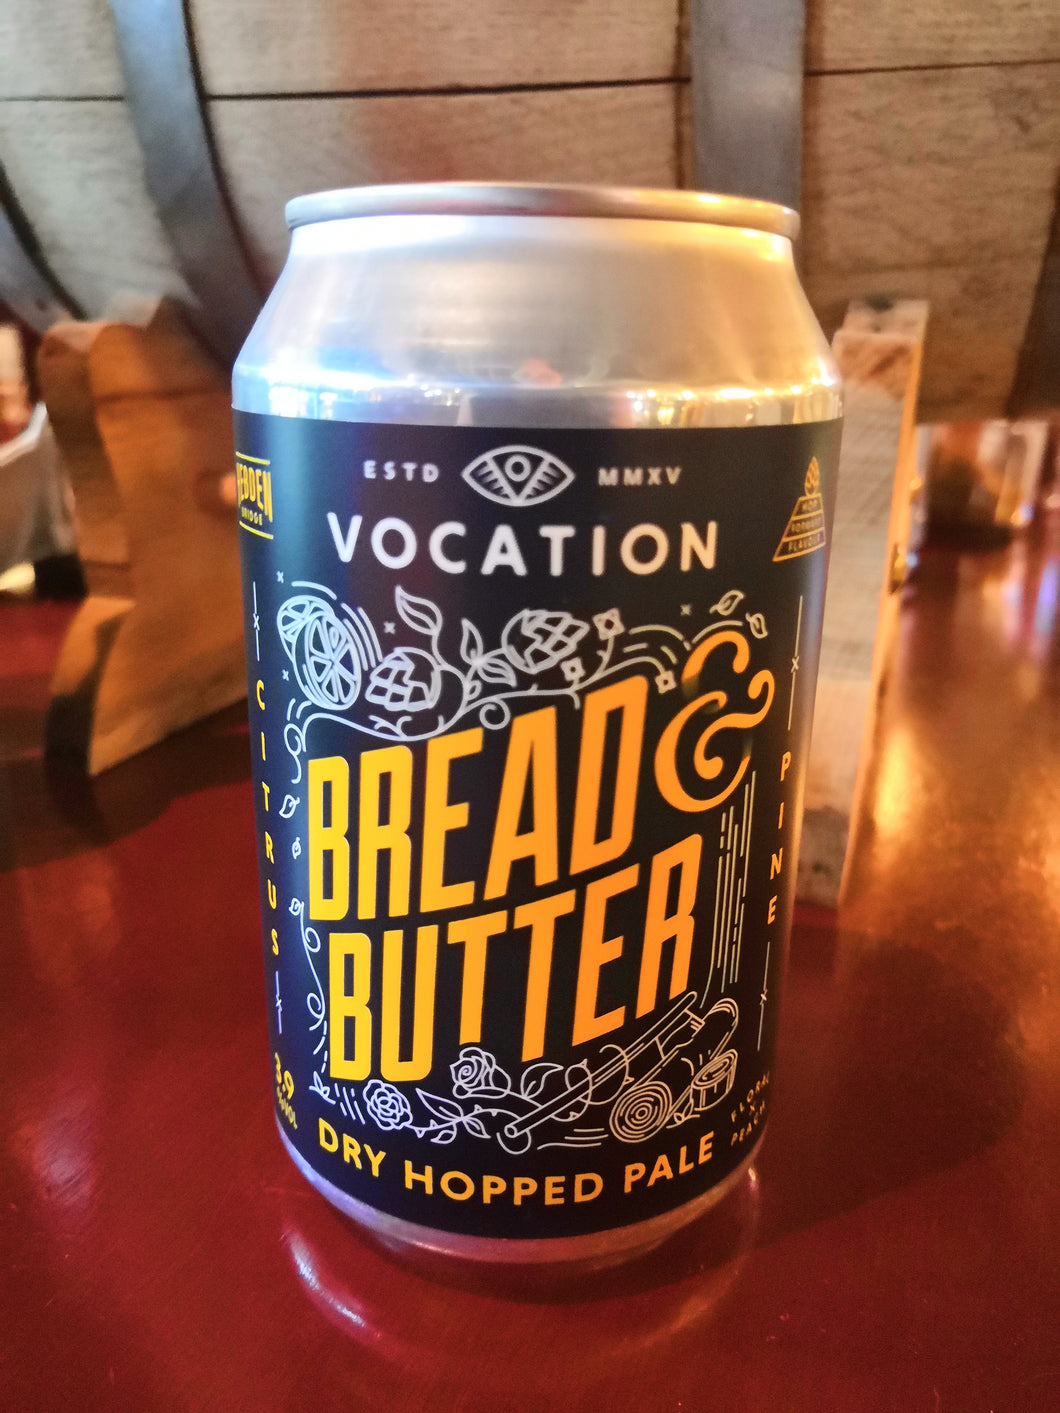 Vocation Bread & Butter